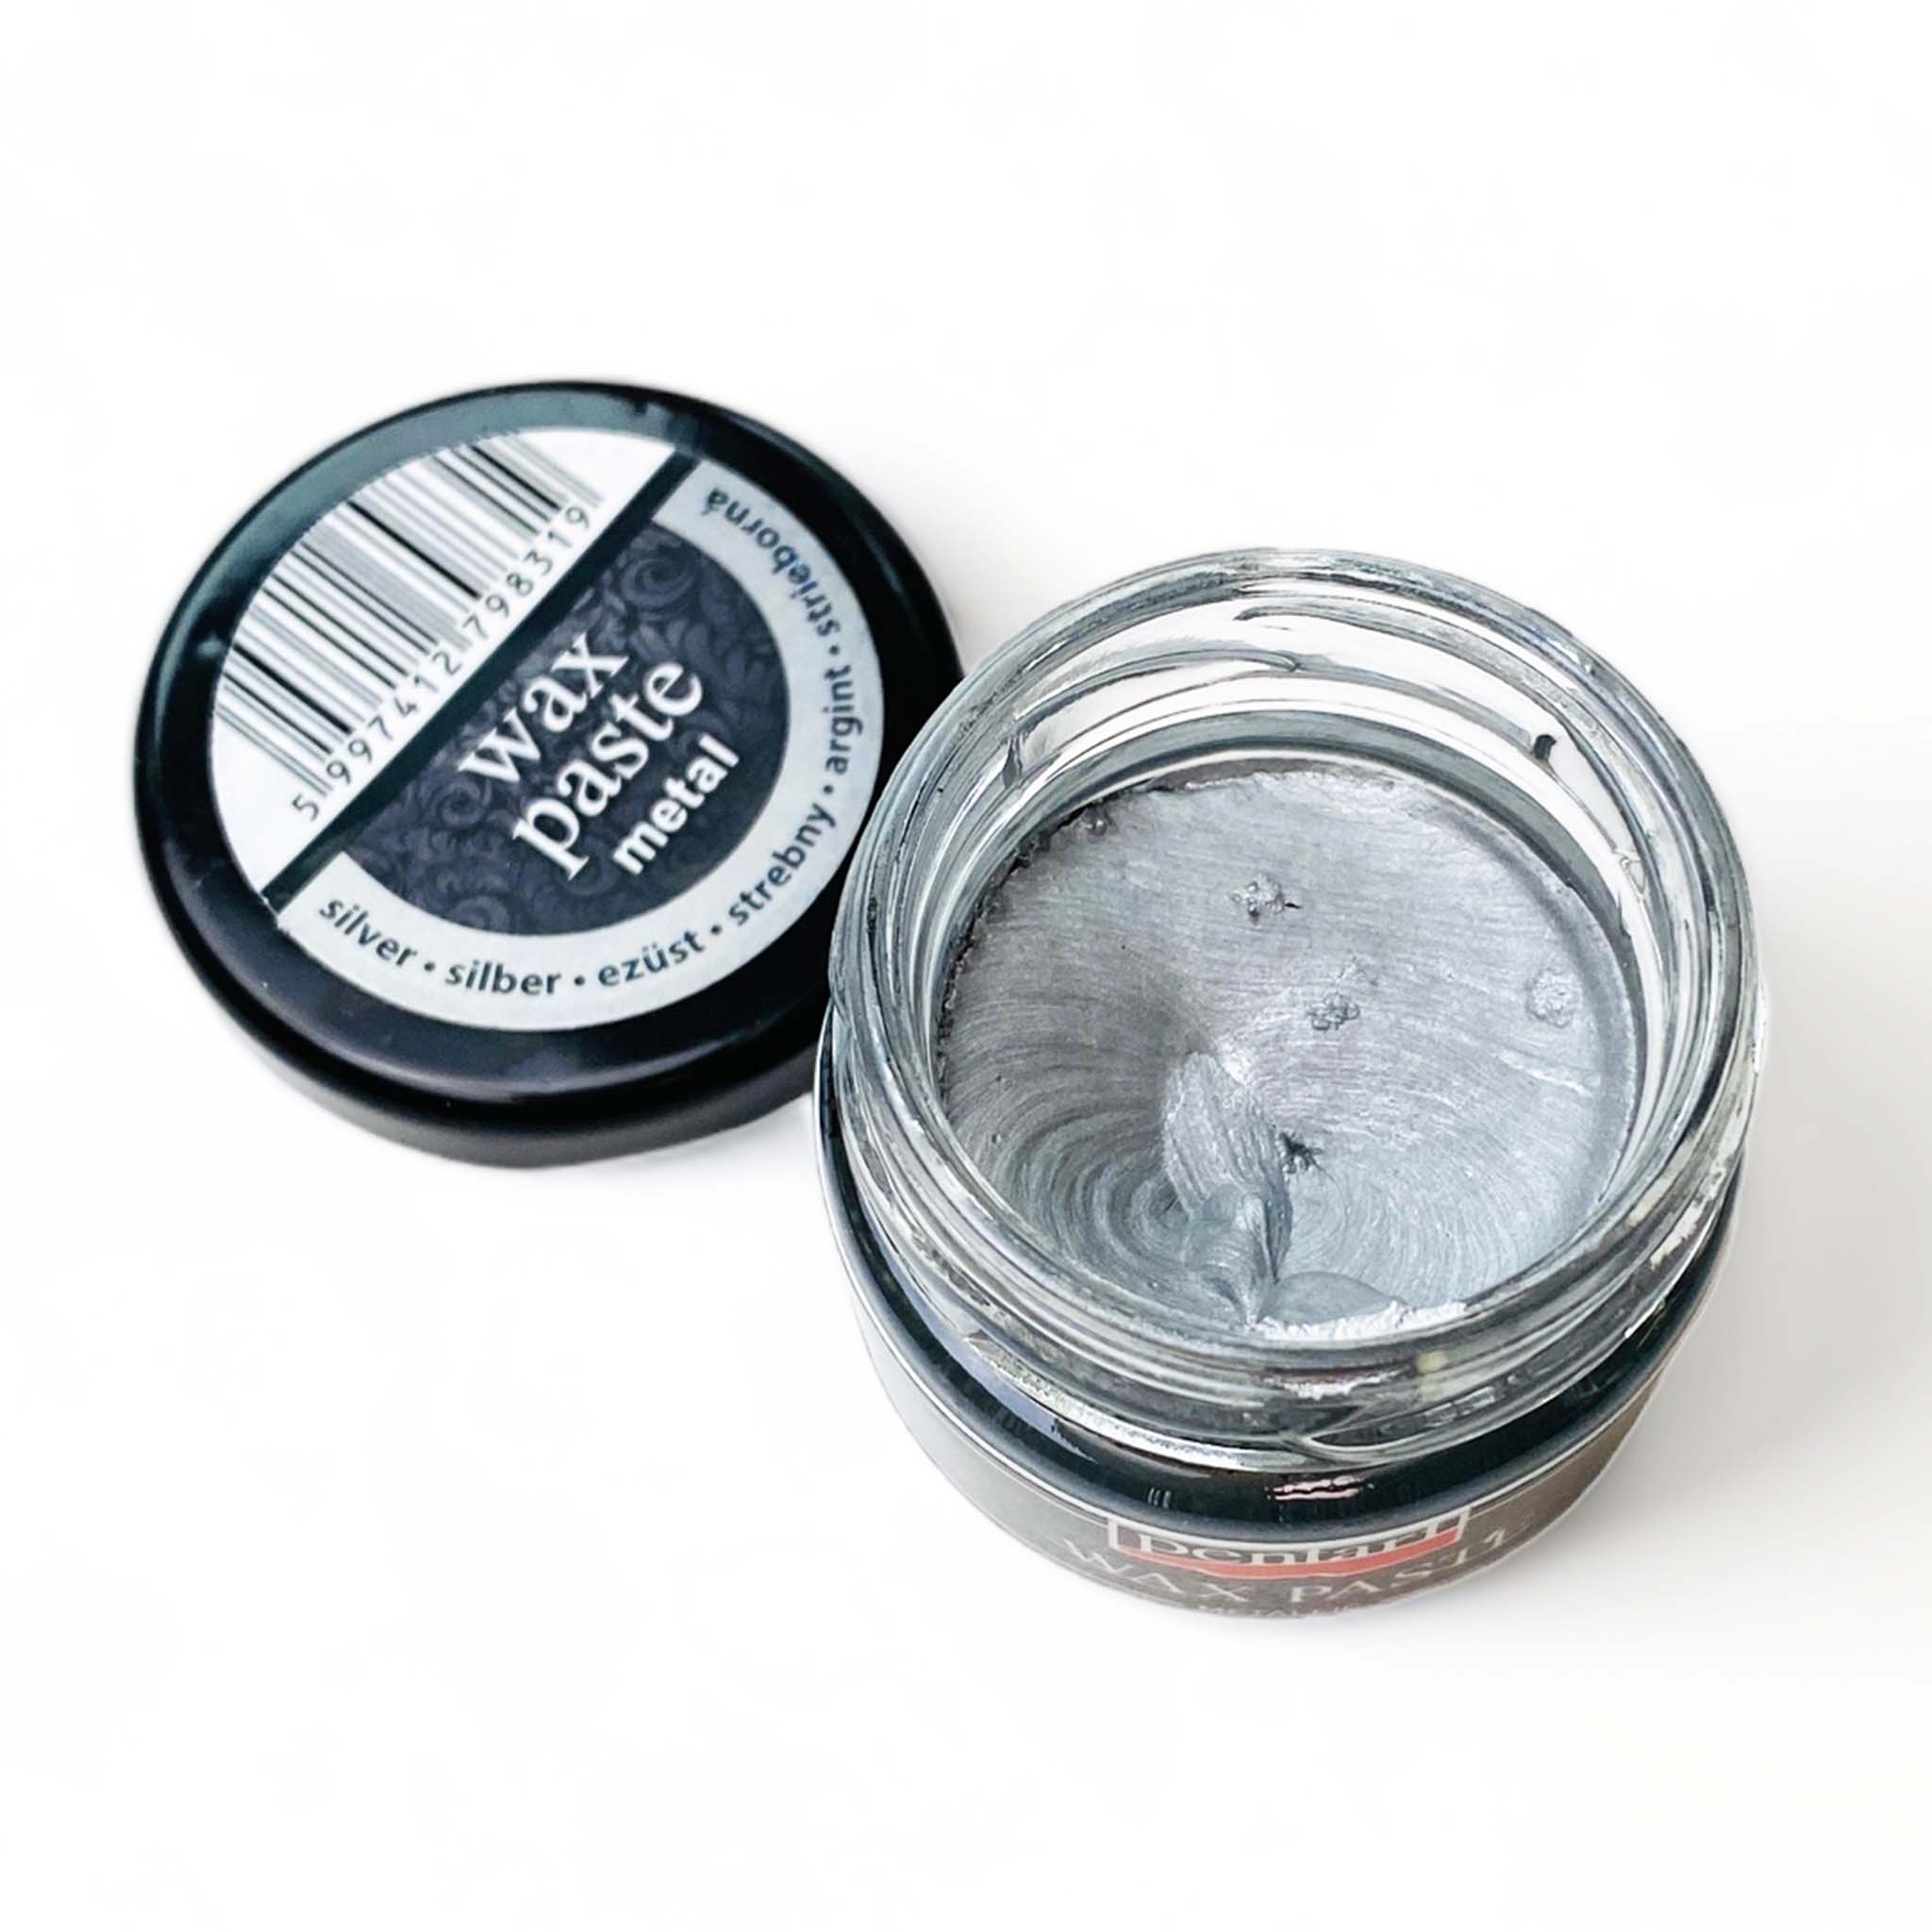 An open jar of a 0.68 ounce jar of metallic silver wax paste by Pentart is against a white background.